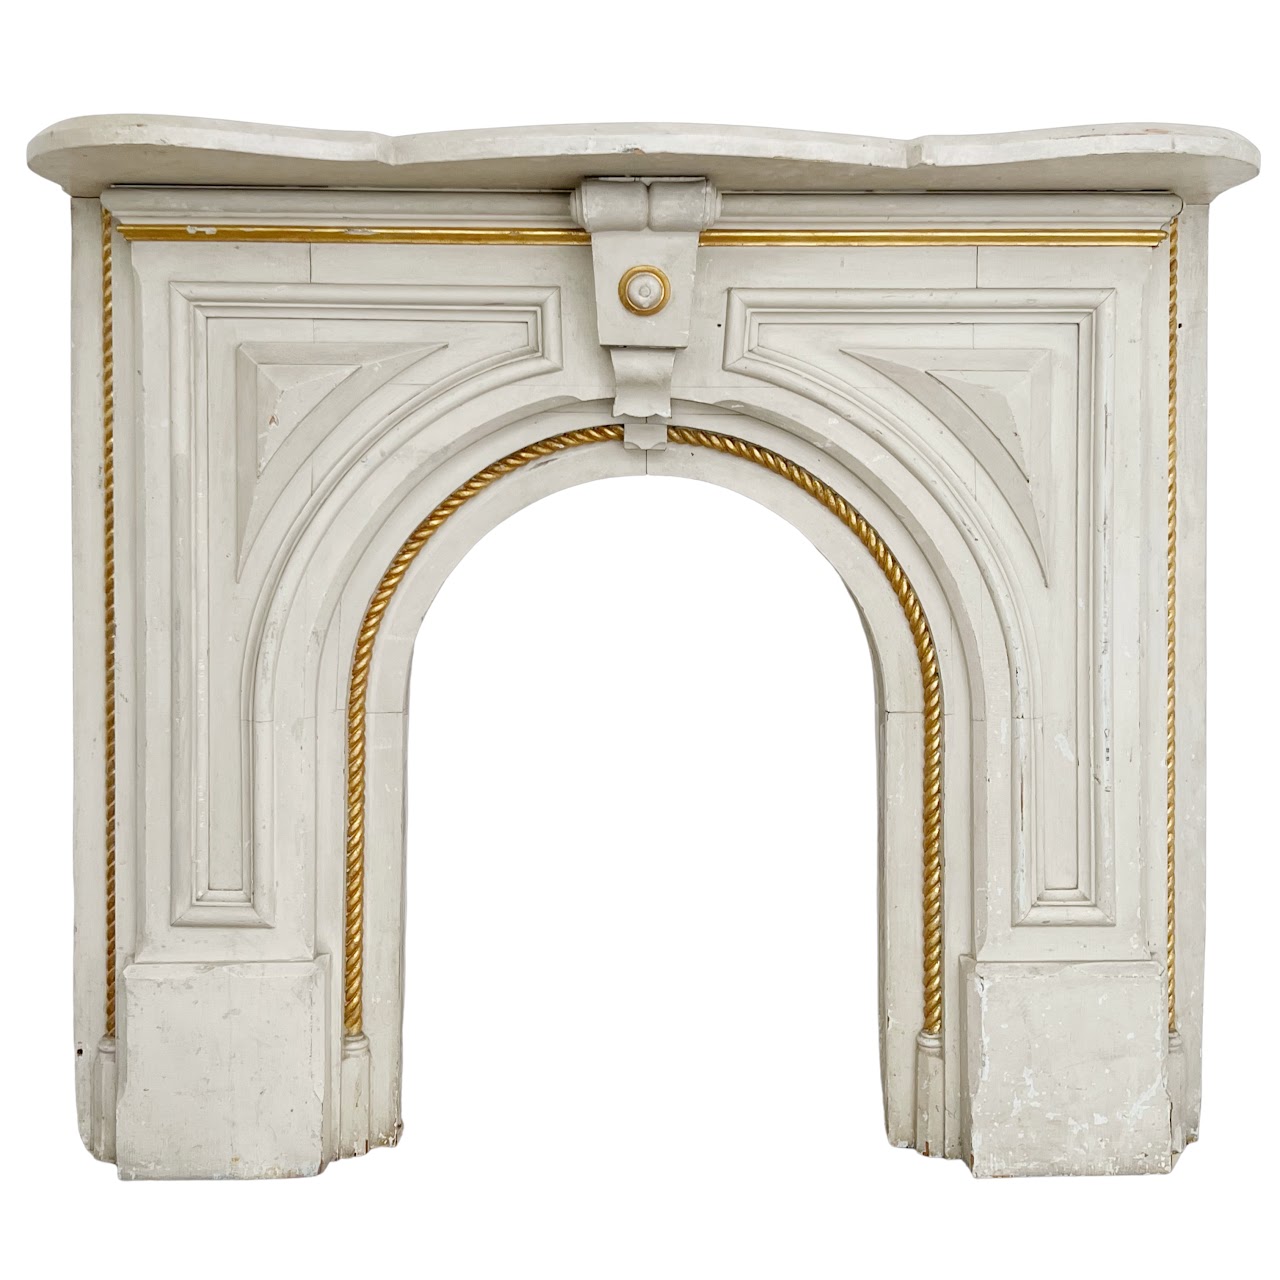 Italianate Parcel Gilt Architectural Salvage Wooden Mantel